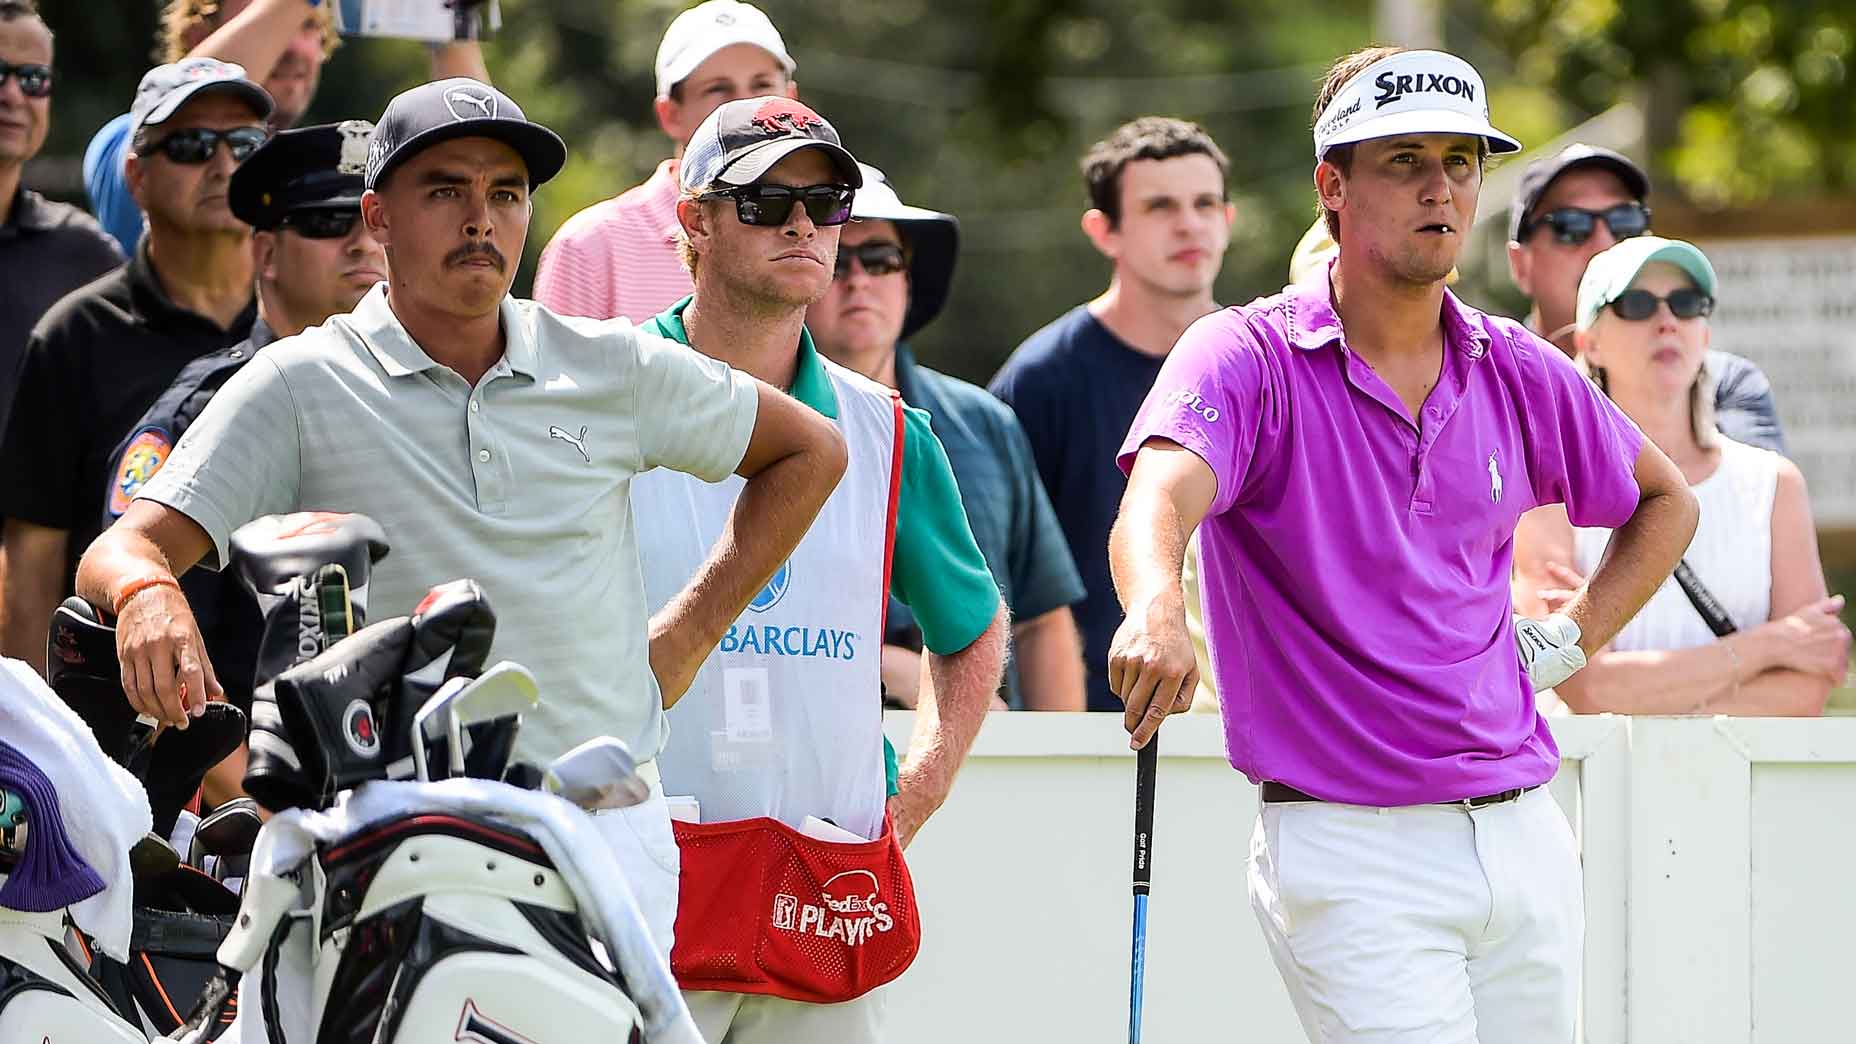 Smylie Kaufman and Rickie Fowler wait to tee off on the 15th hole during the first round of The Barclays at Bethpage State Park (Black) on August 25, 2016 in Farmingdale, New York.